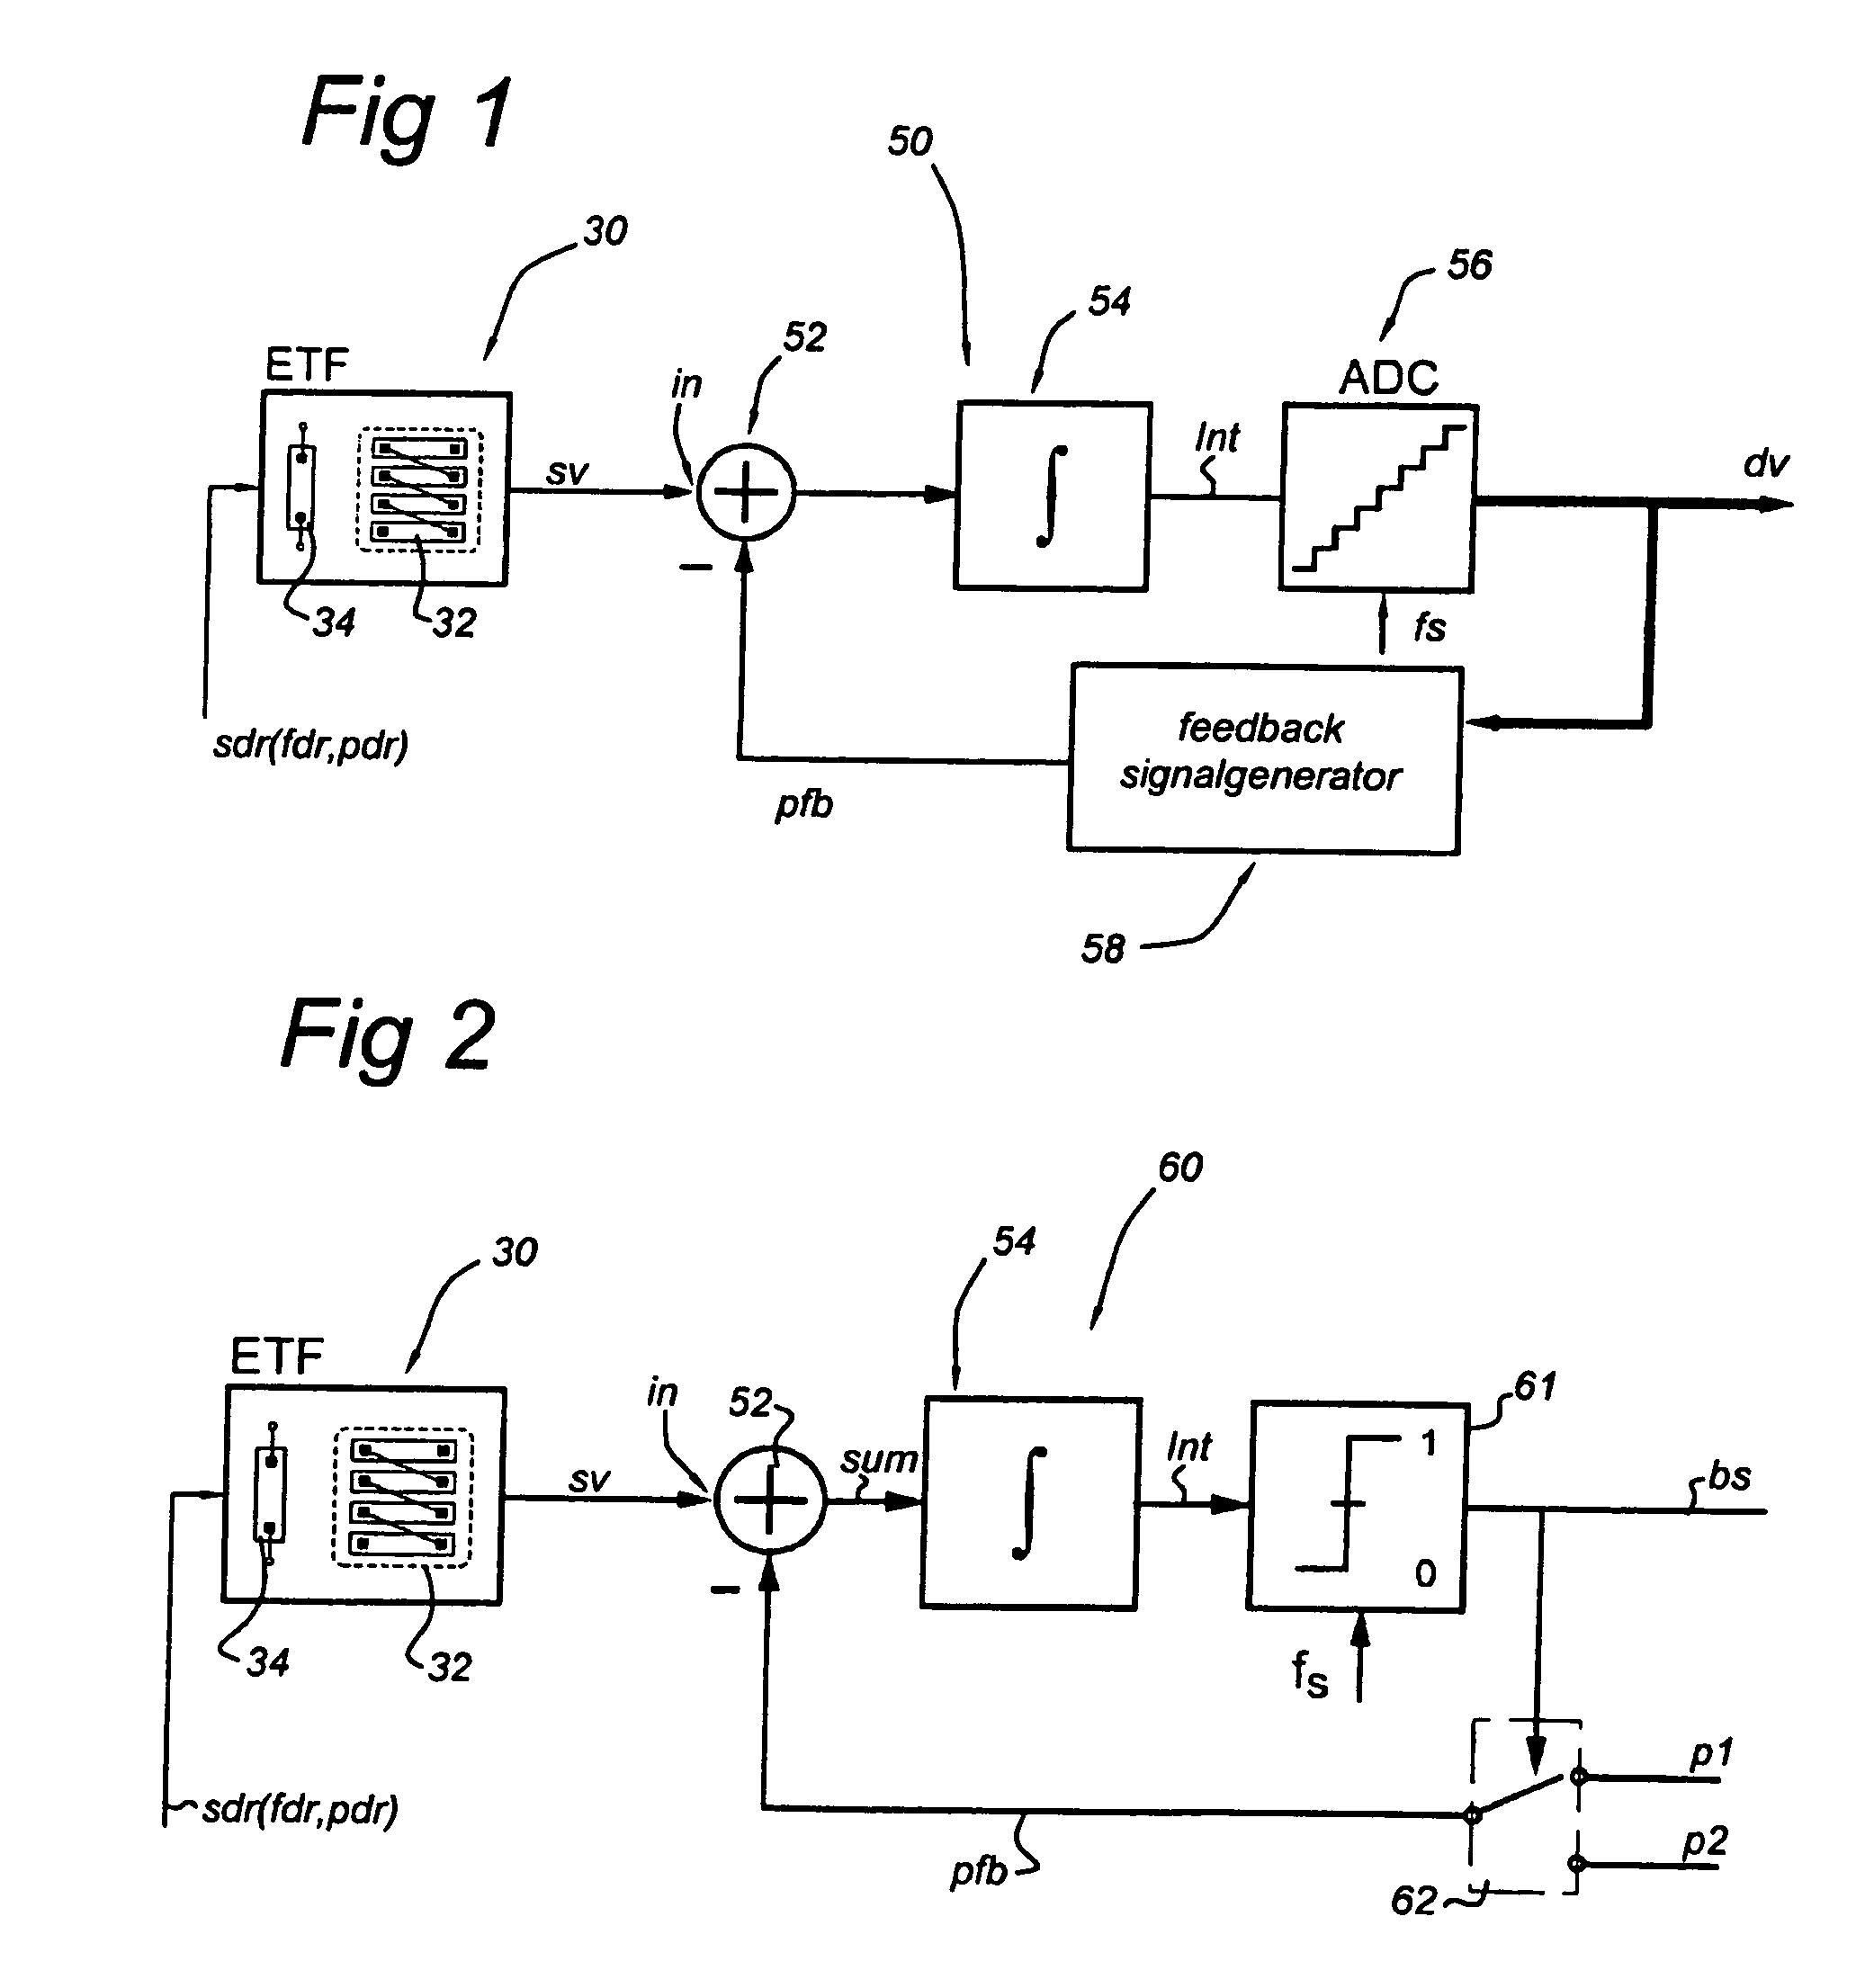 Synchronous phase detection circuit